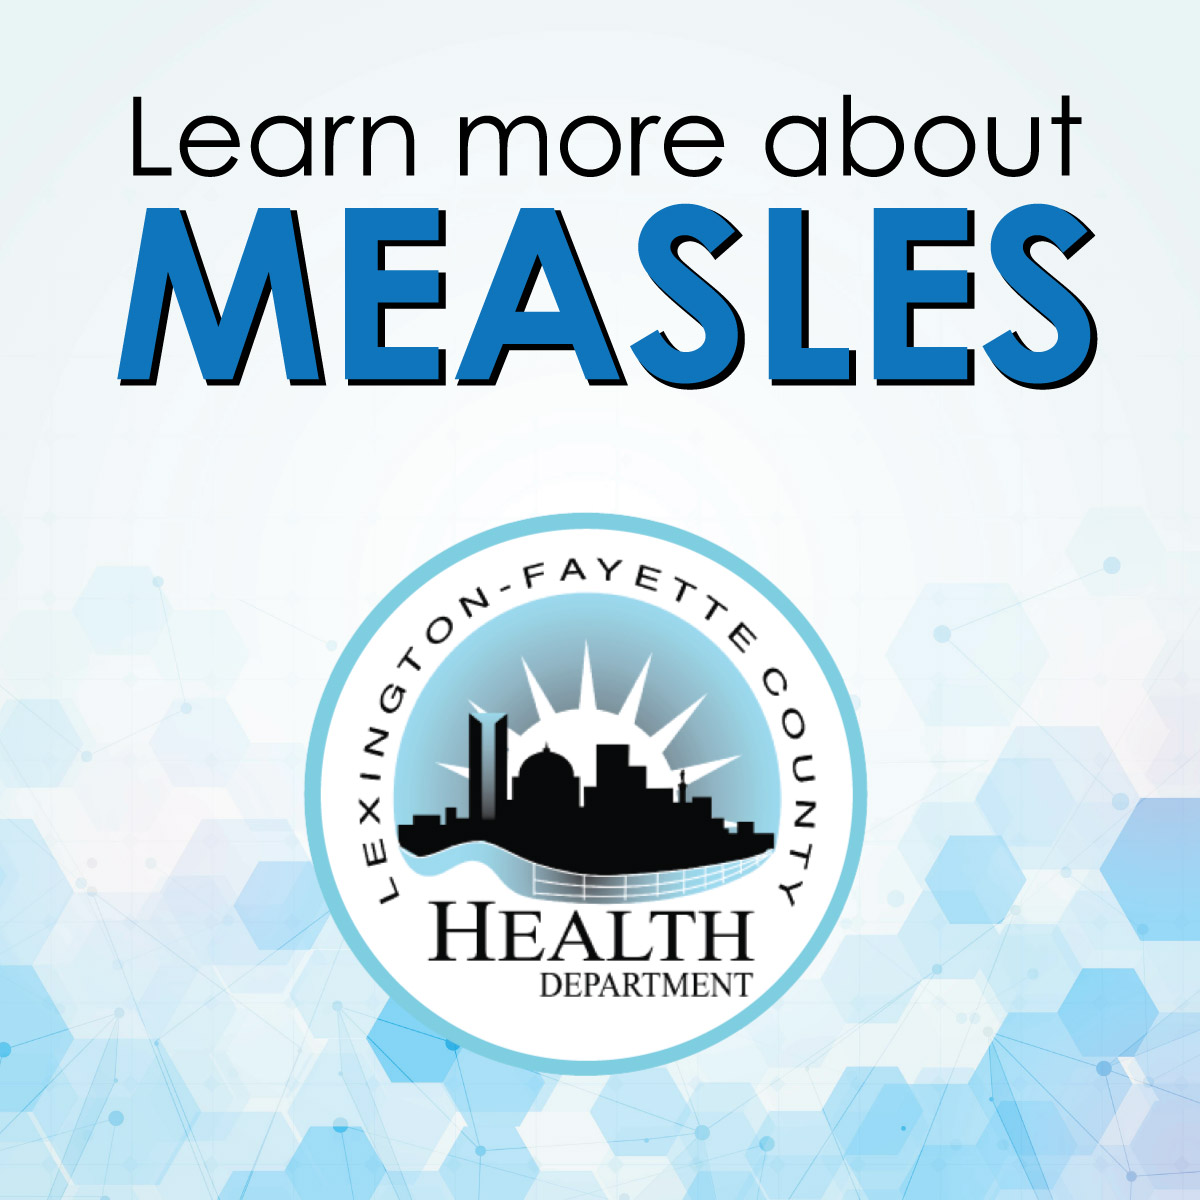 Learn more about measles